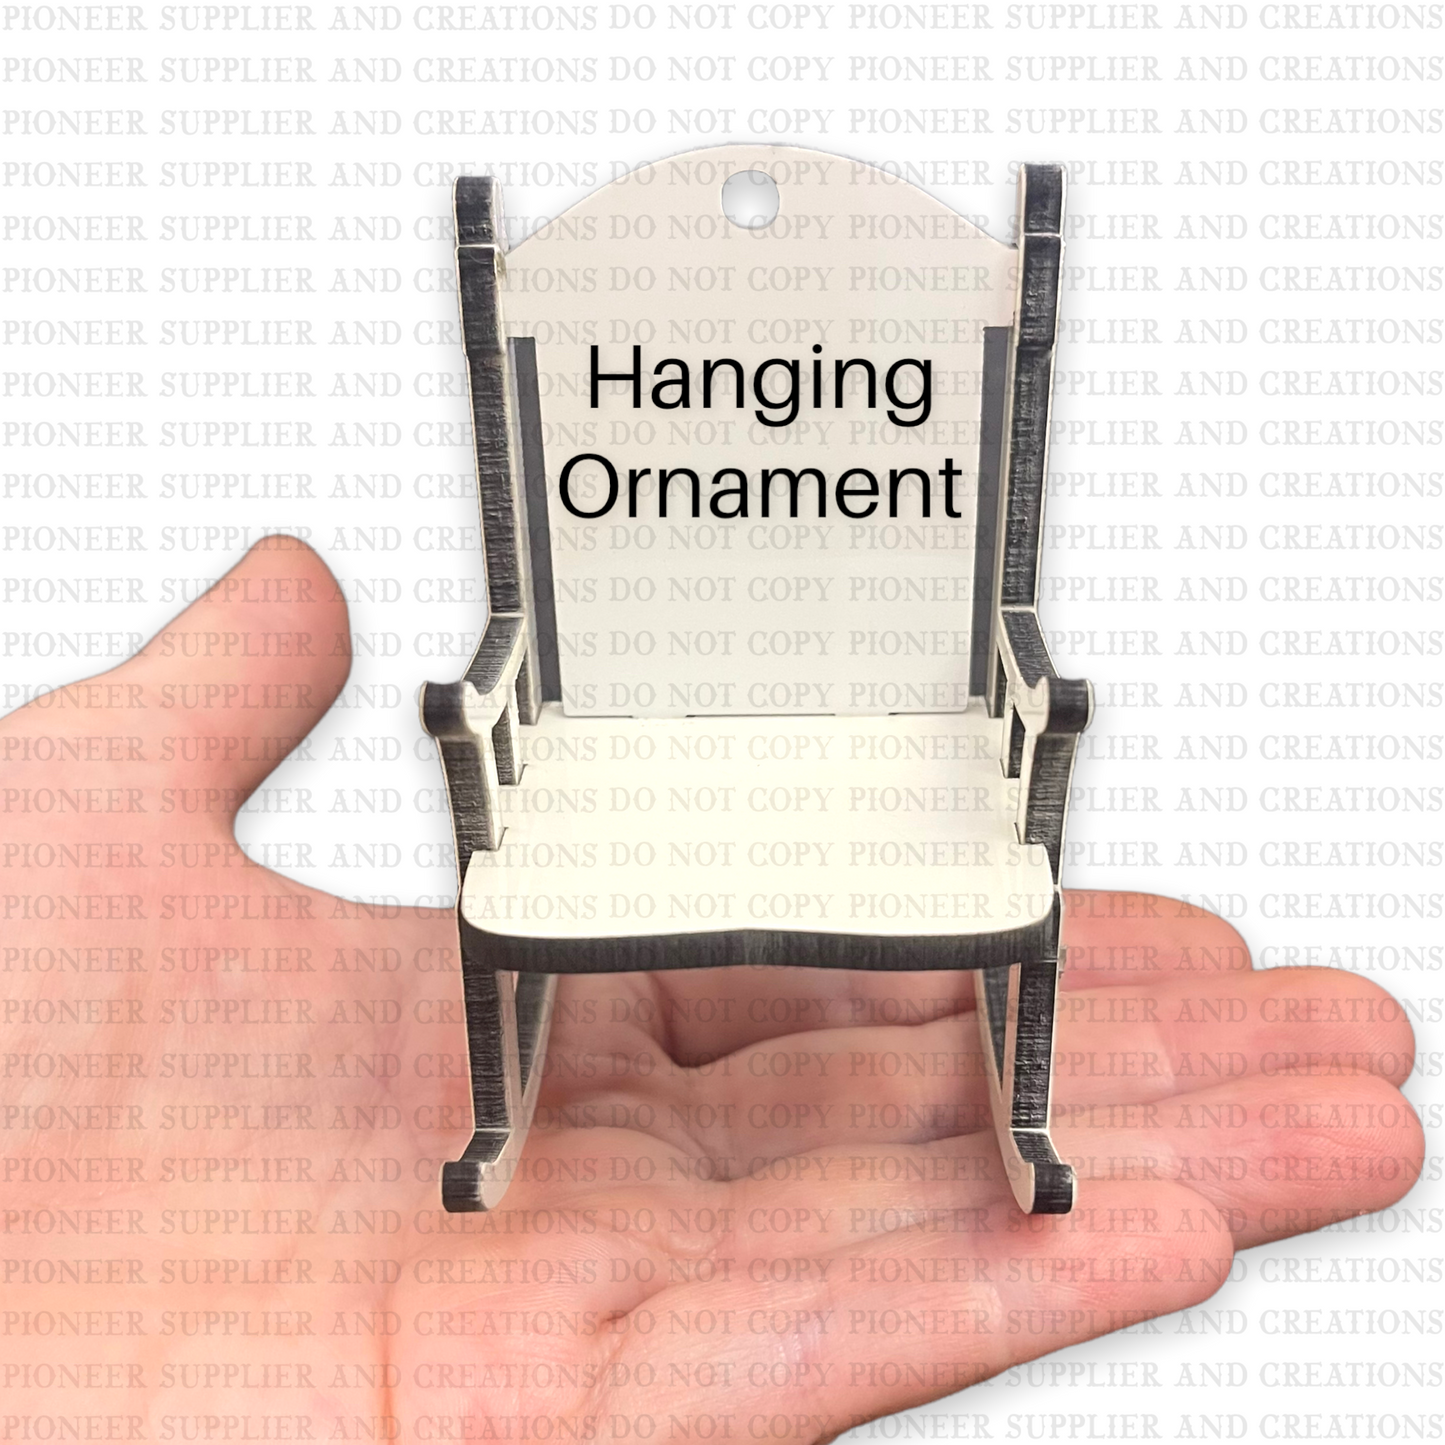 Hanging Rocking Chair Ornament Sublimation Blank